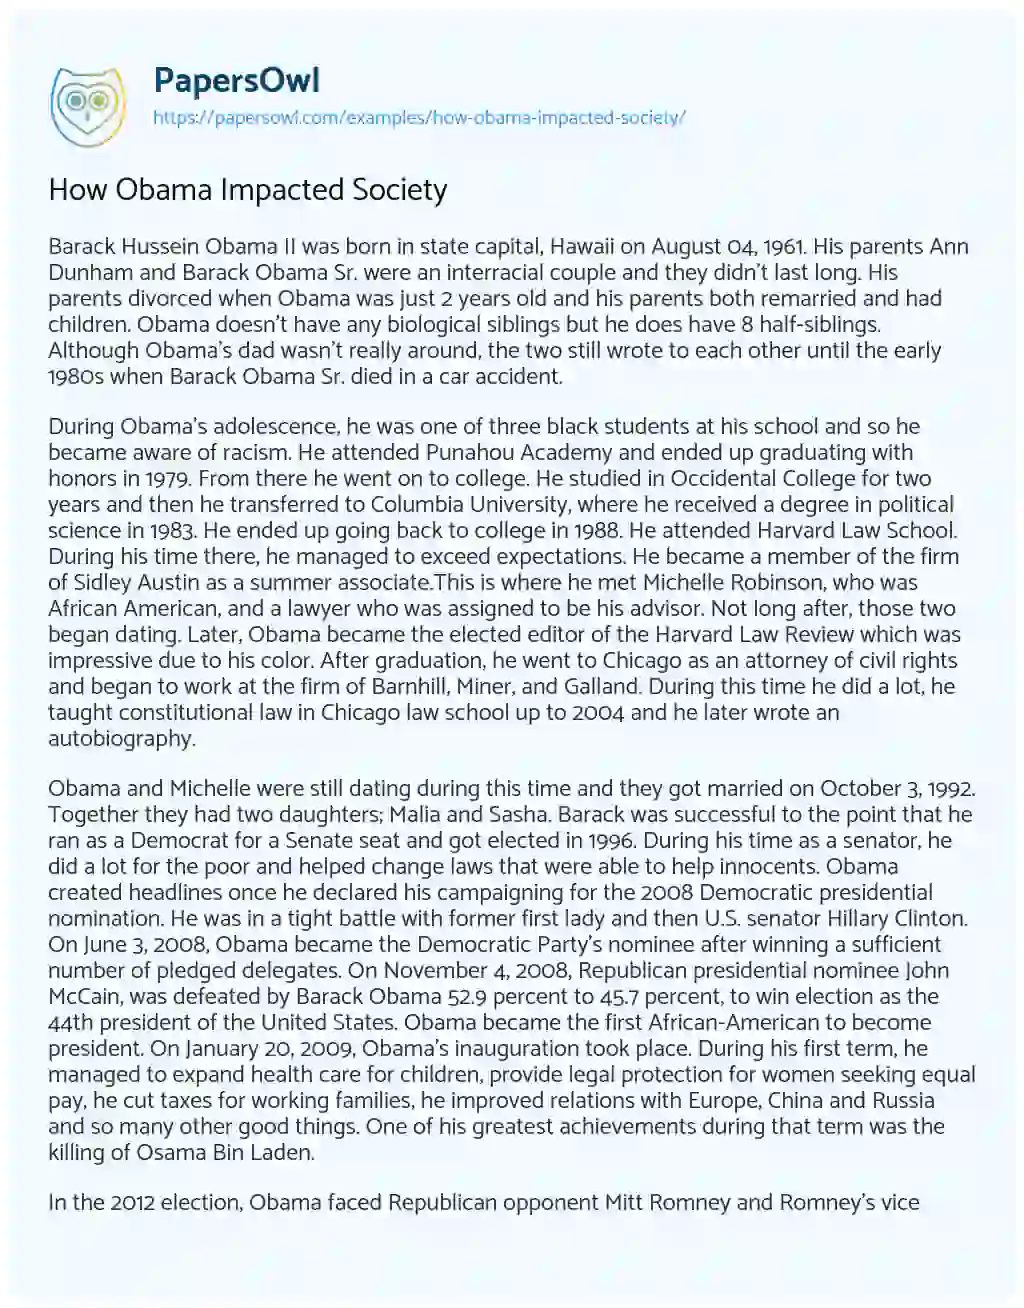 Essay on How Obama Impacted Society